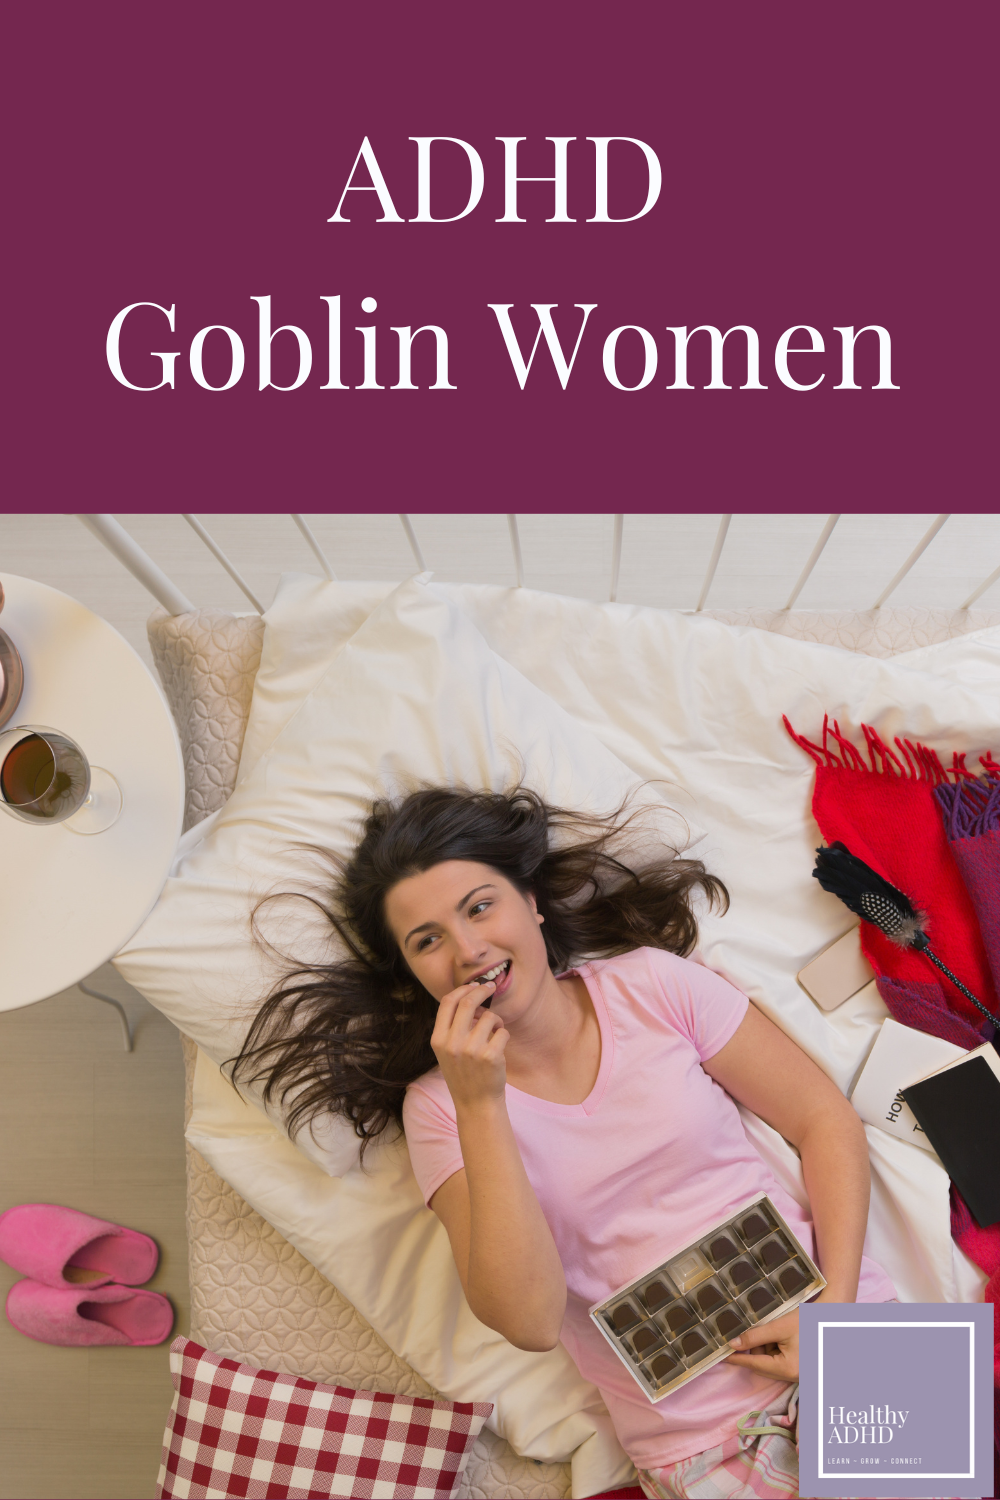 Woman in bed eating chocolate and doing nothing